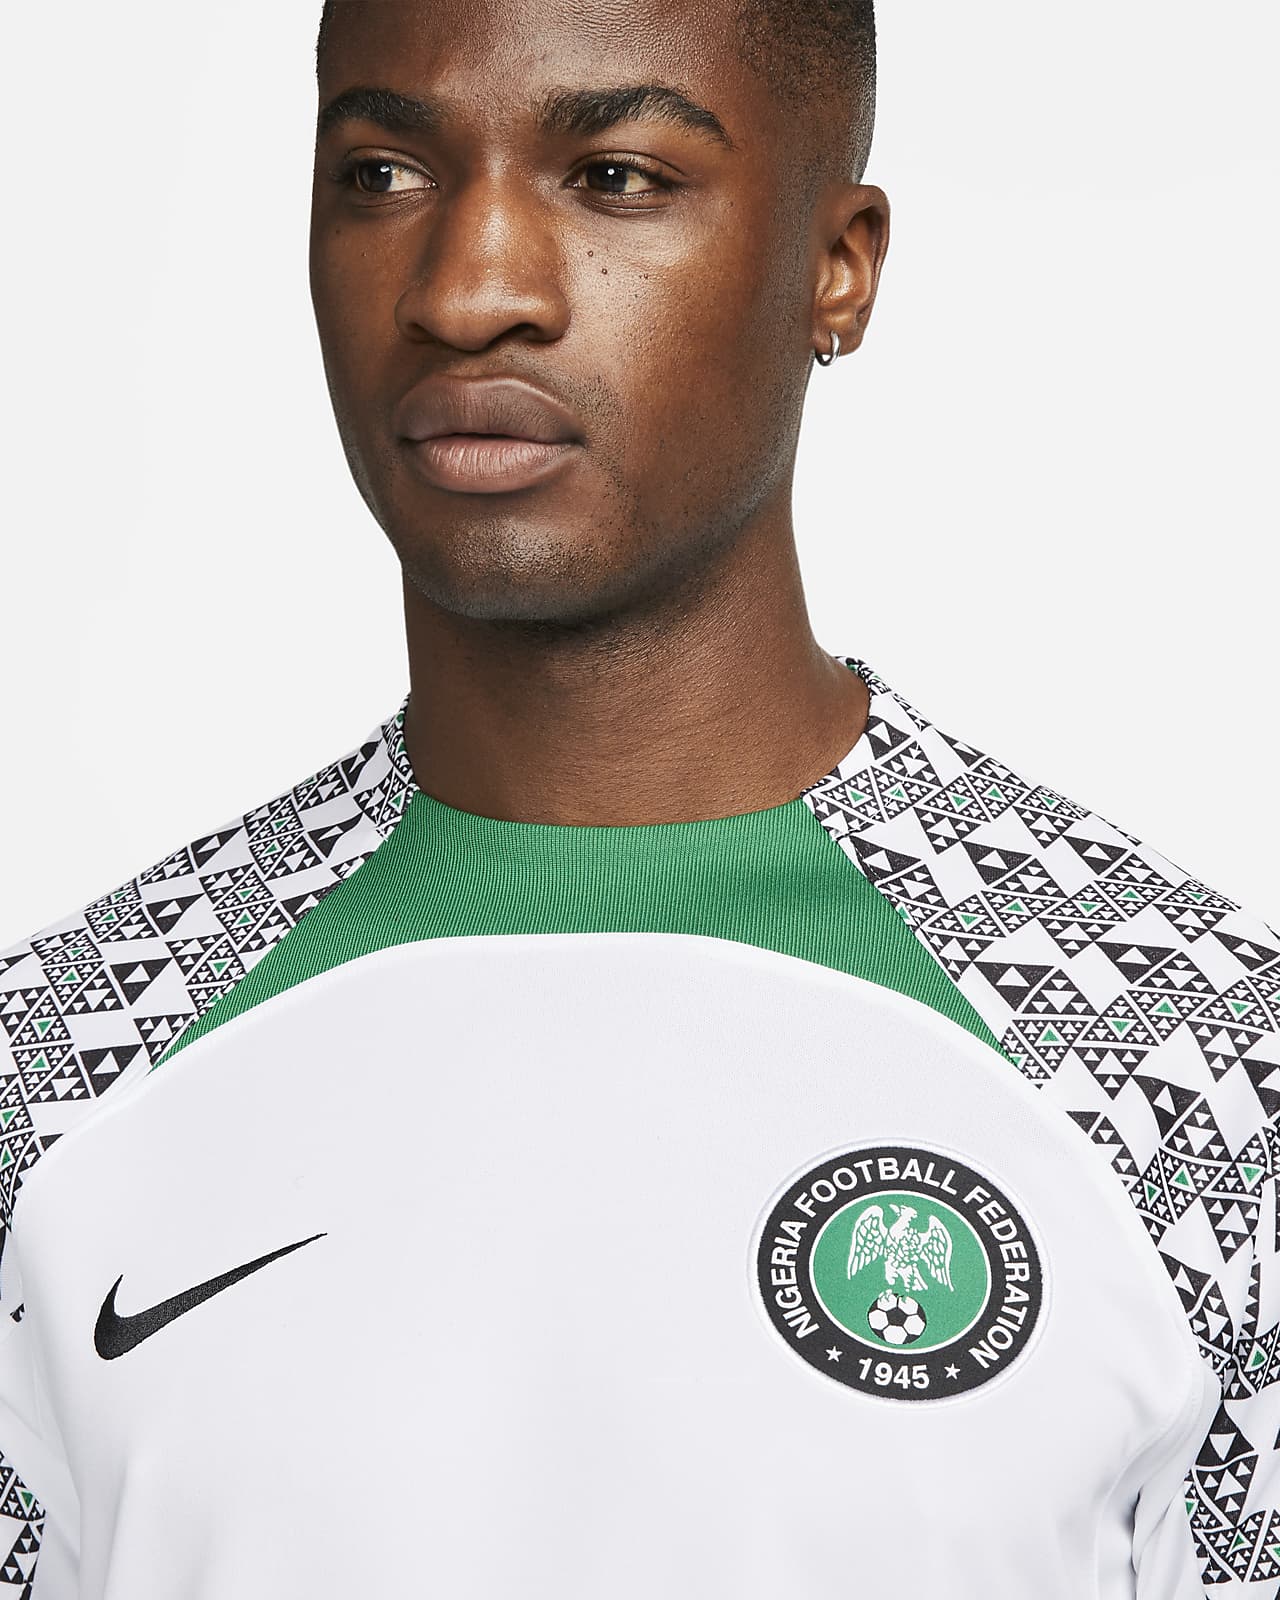 nigerian football jersey for sale